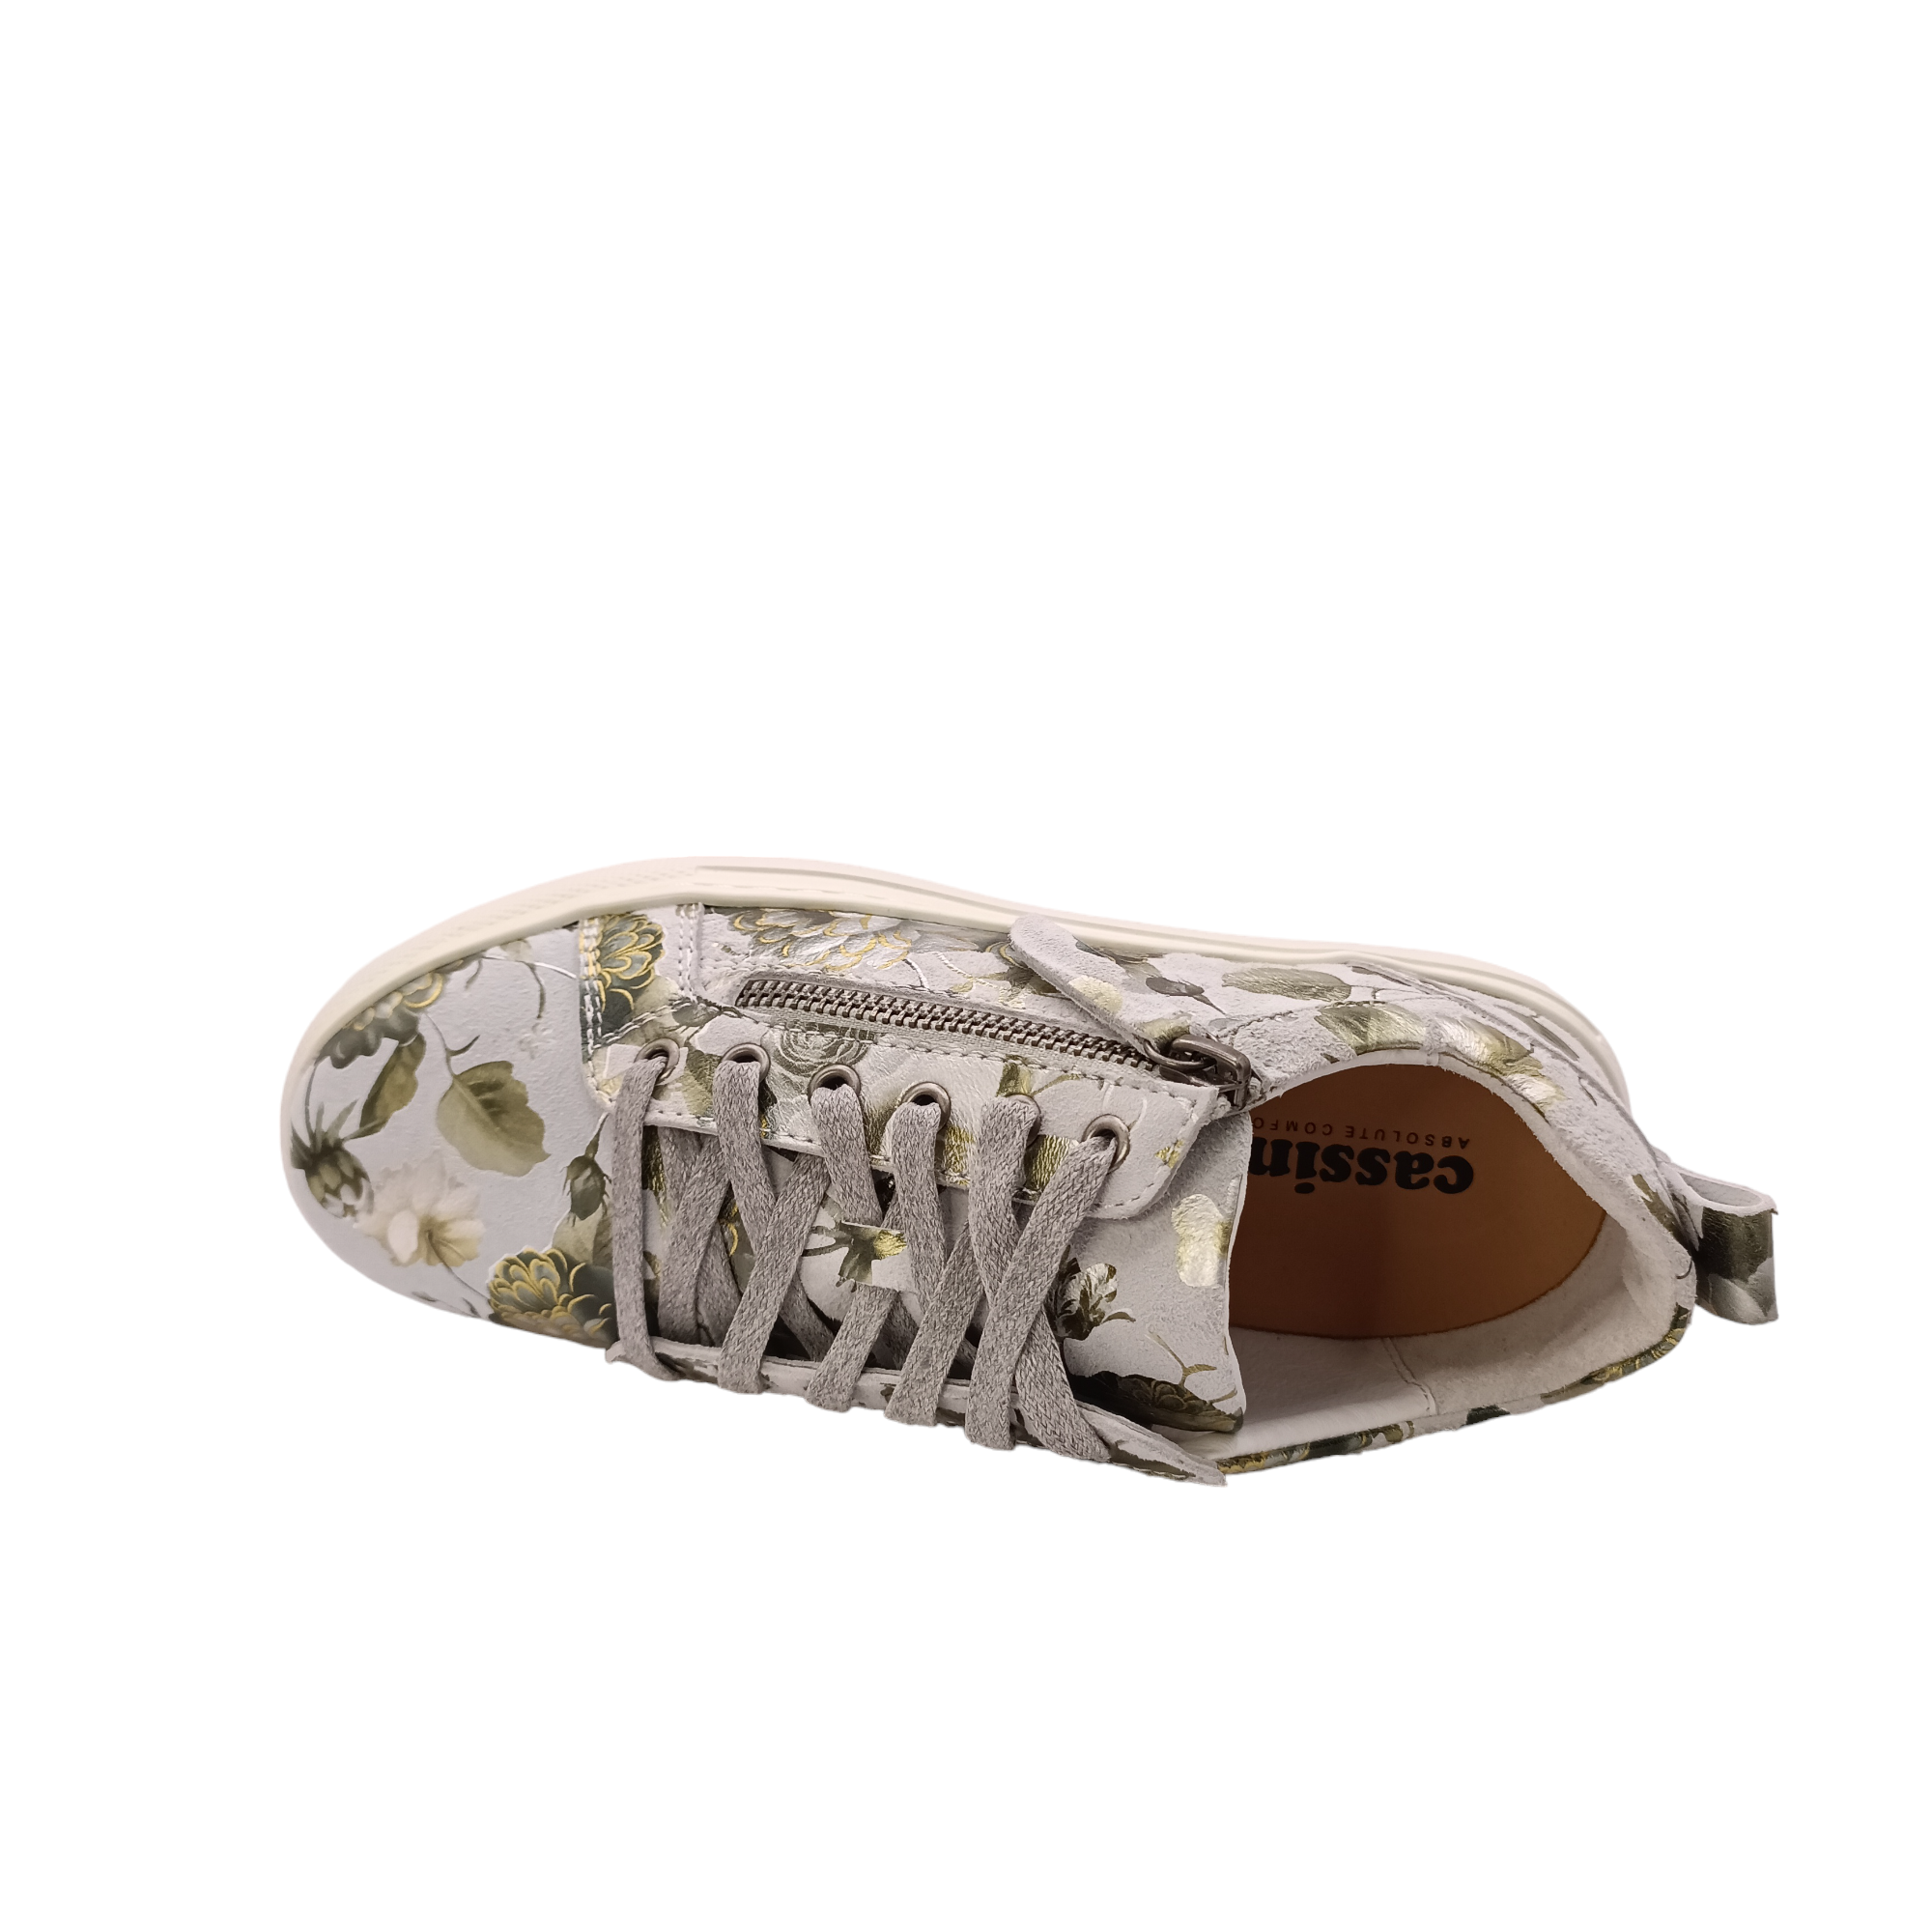 Silver sneaker with side zip. Leather printed with green and gold patterned floral design. Step into style and comfort with the stunning Cassini shoes. Featuring a unique floral and metallic pattern, these women's shoes offer the perfect blend of fashion and function. These&nbsp;Cassini shoes are sure to become your new go-to for comfortable style